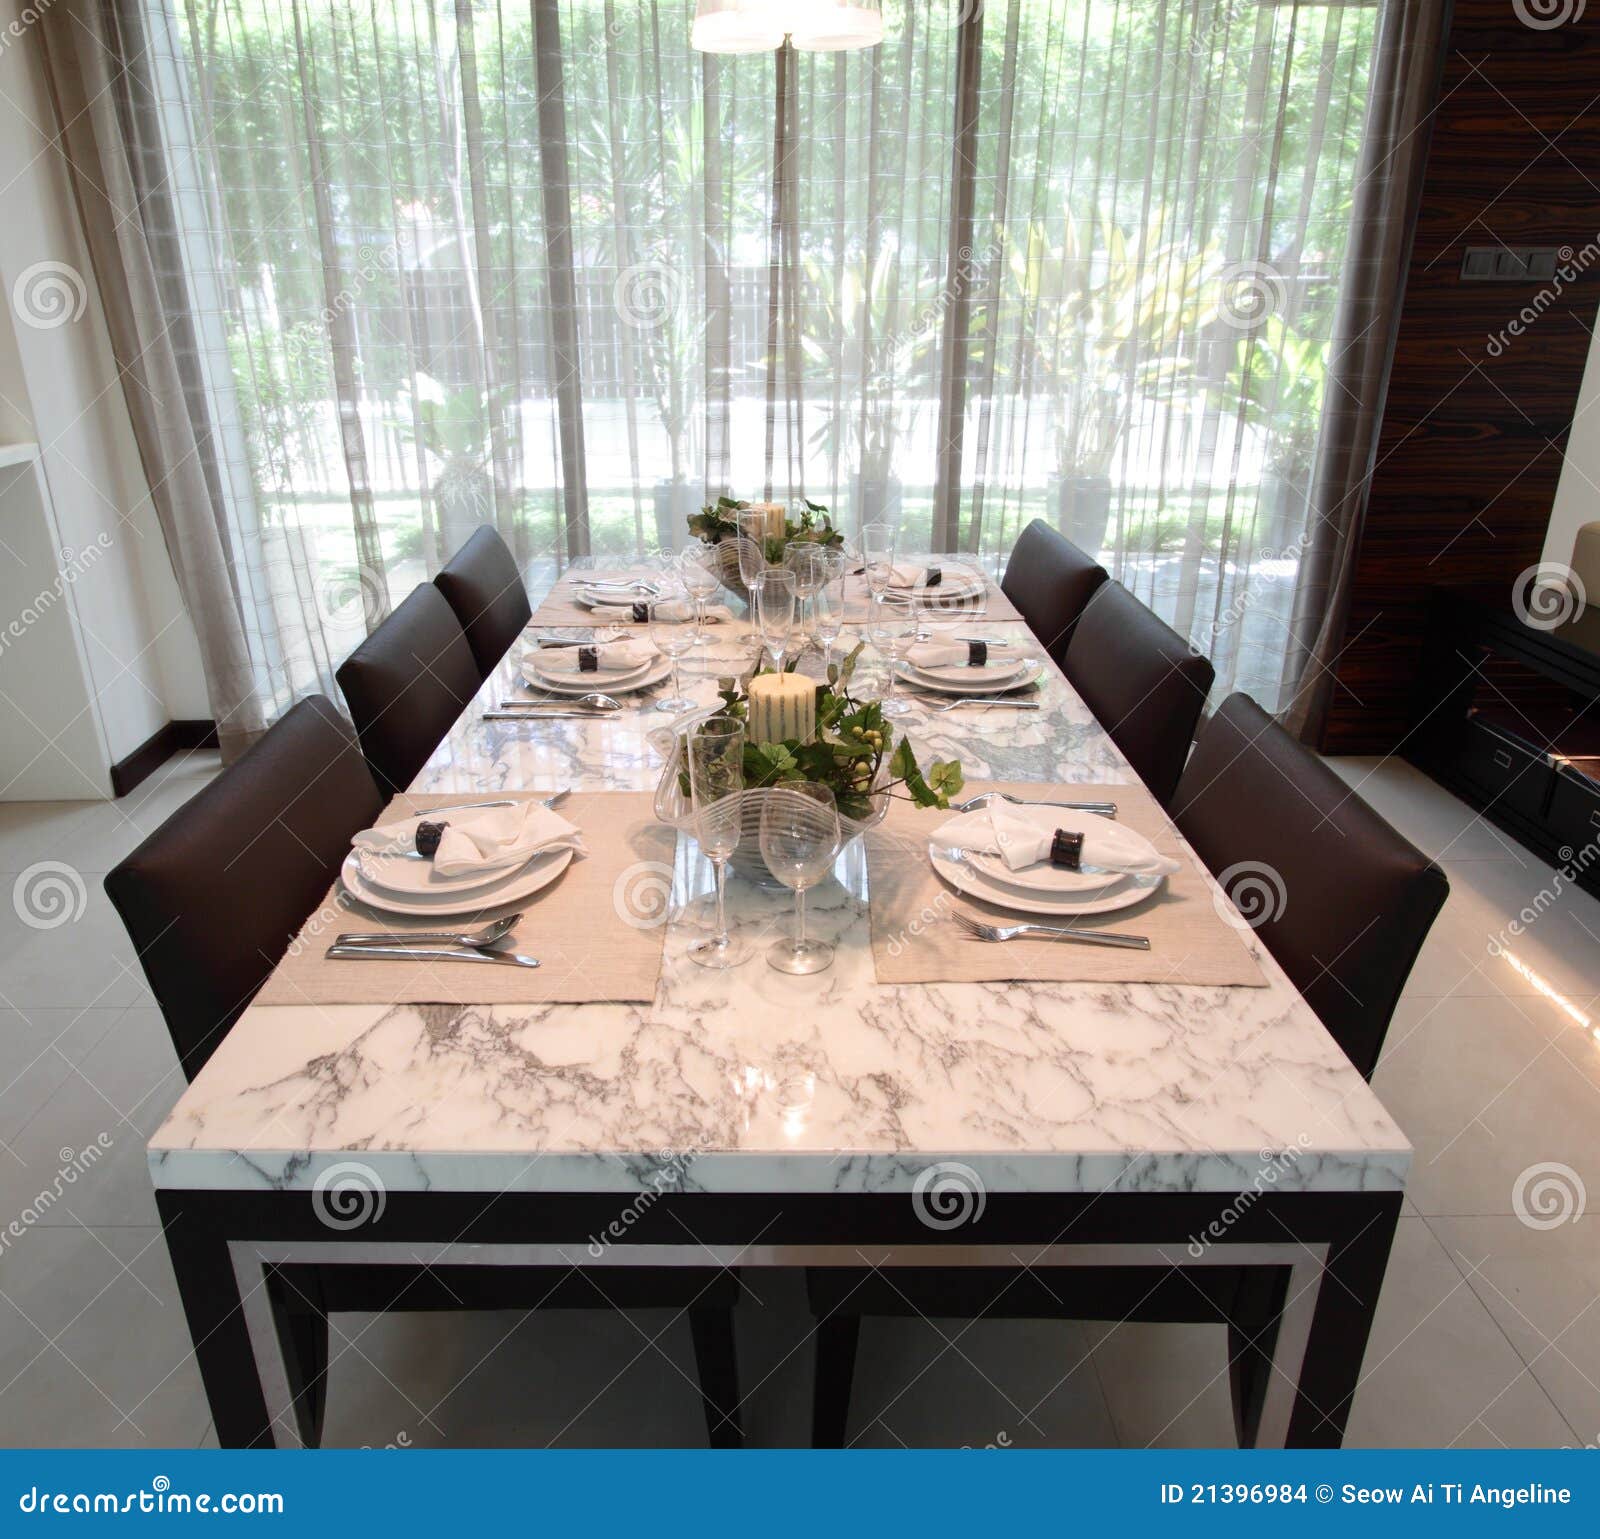 Dining Table stock photo. Image of table, decoration - 21396984